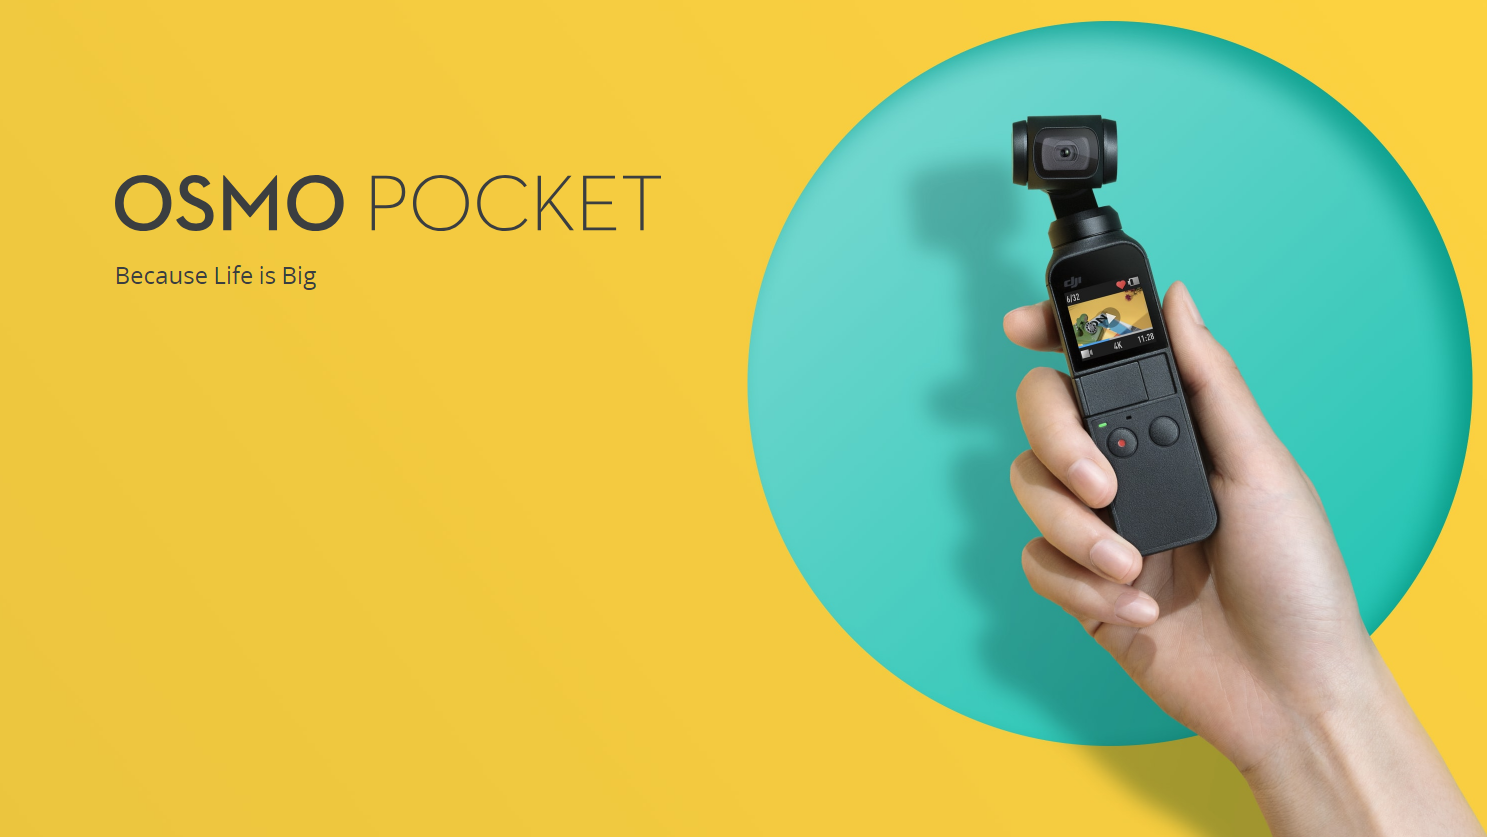 3 Tips to Quickly Charge DJI Osmo Pocket